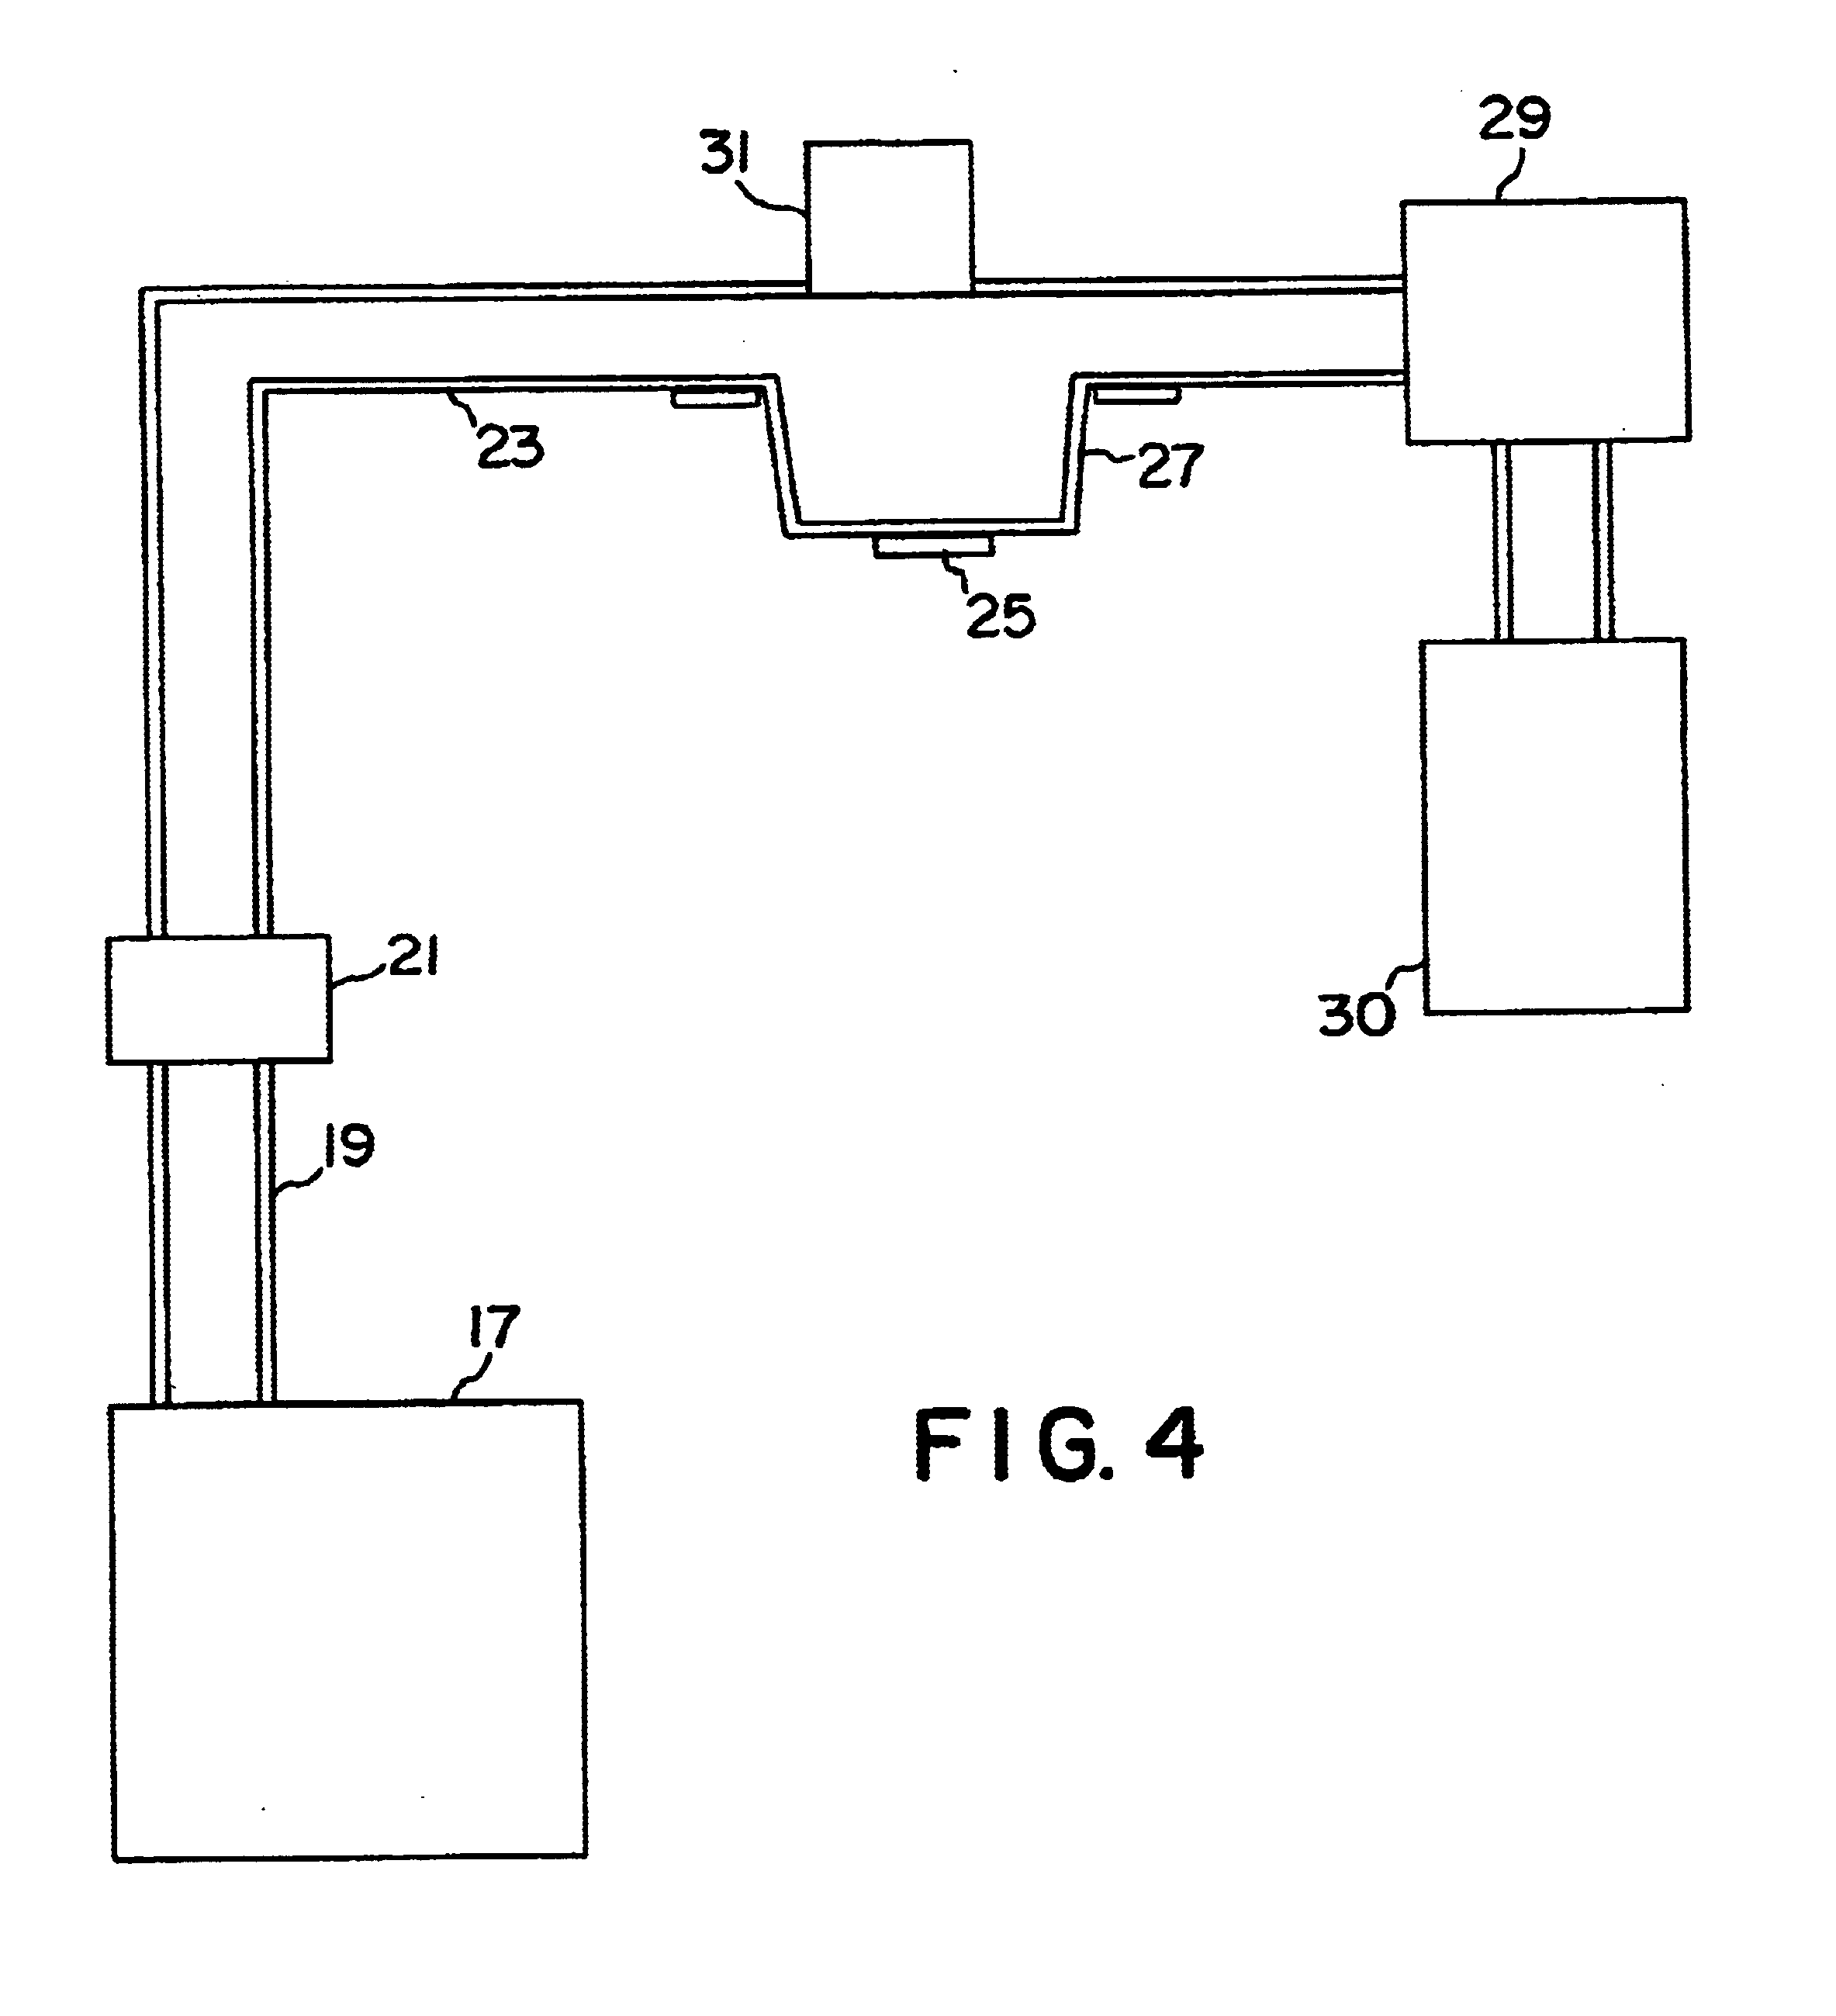 Method for depositing particles onto a substrate using an alternating electric field